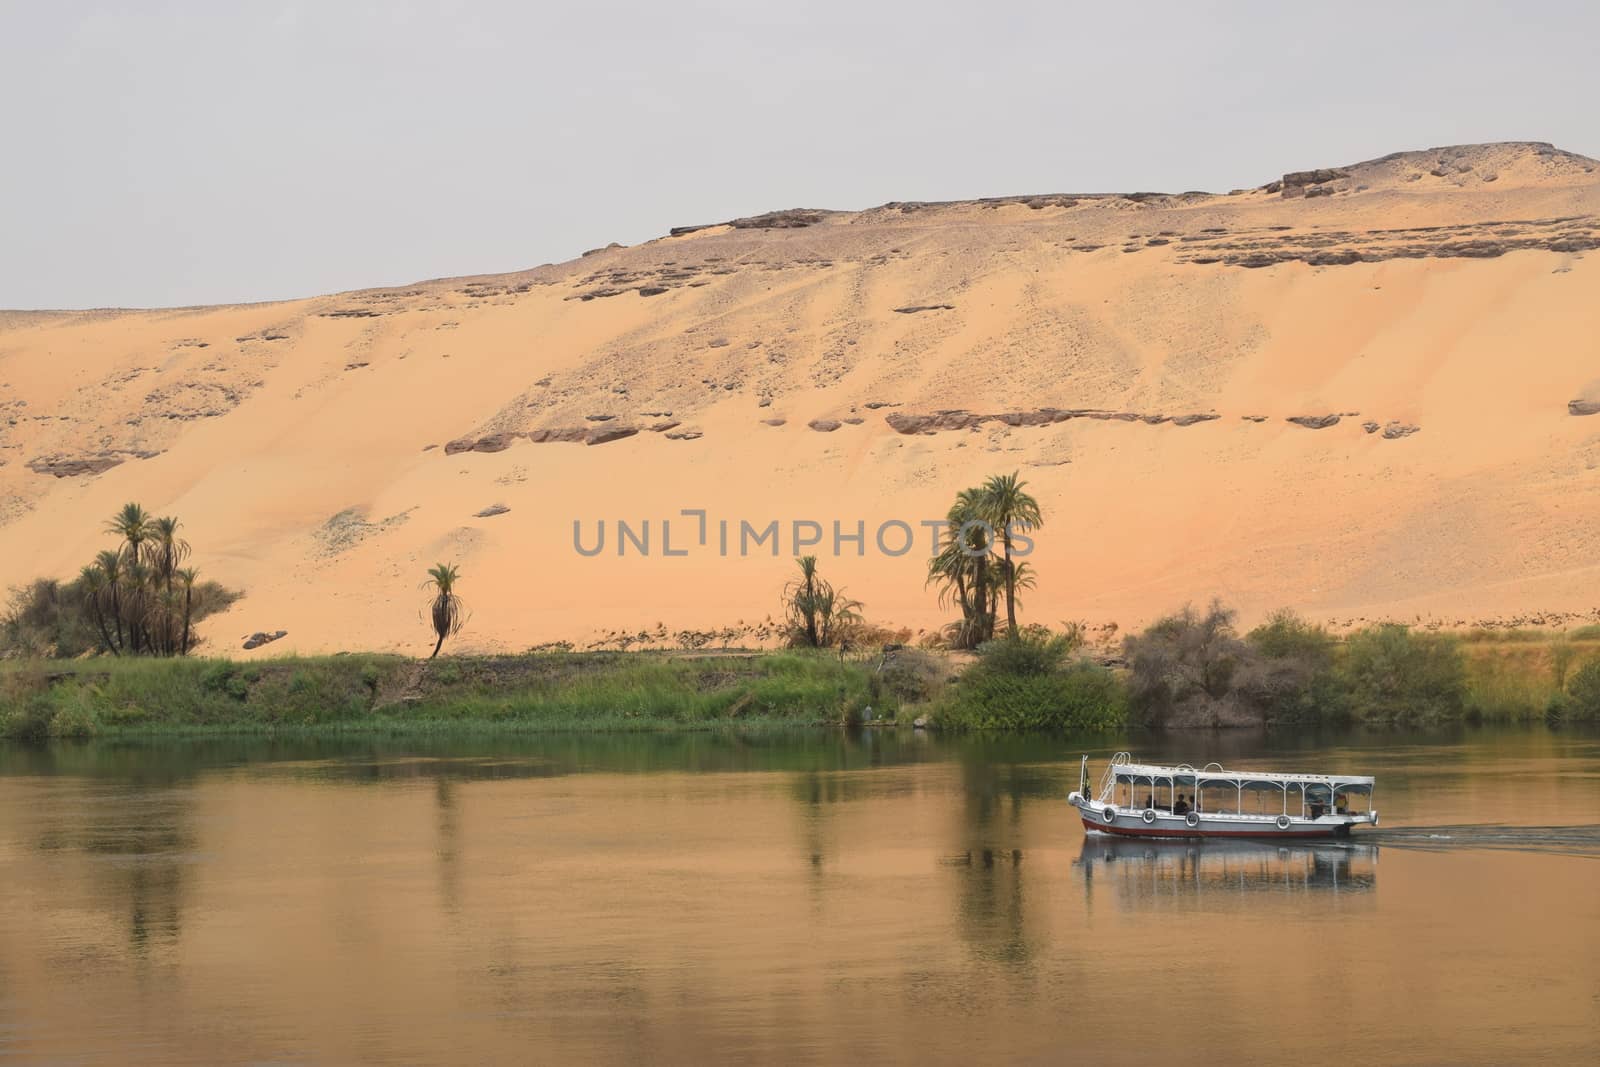 The beginning of the Sahara Desert With the Nile in the foreground taken in Aswan Egypt with Nile River Boat